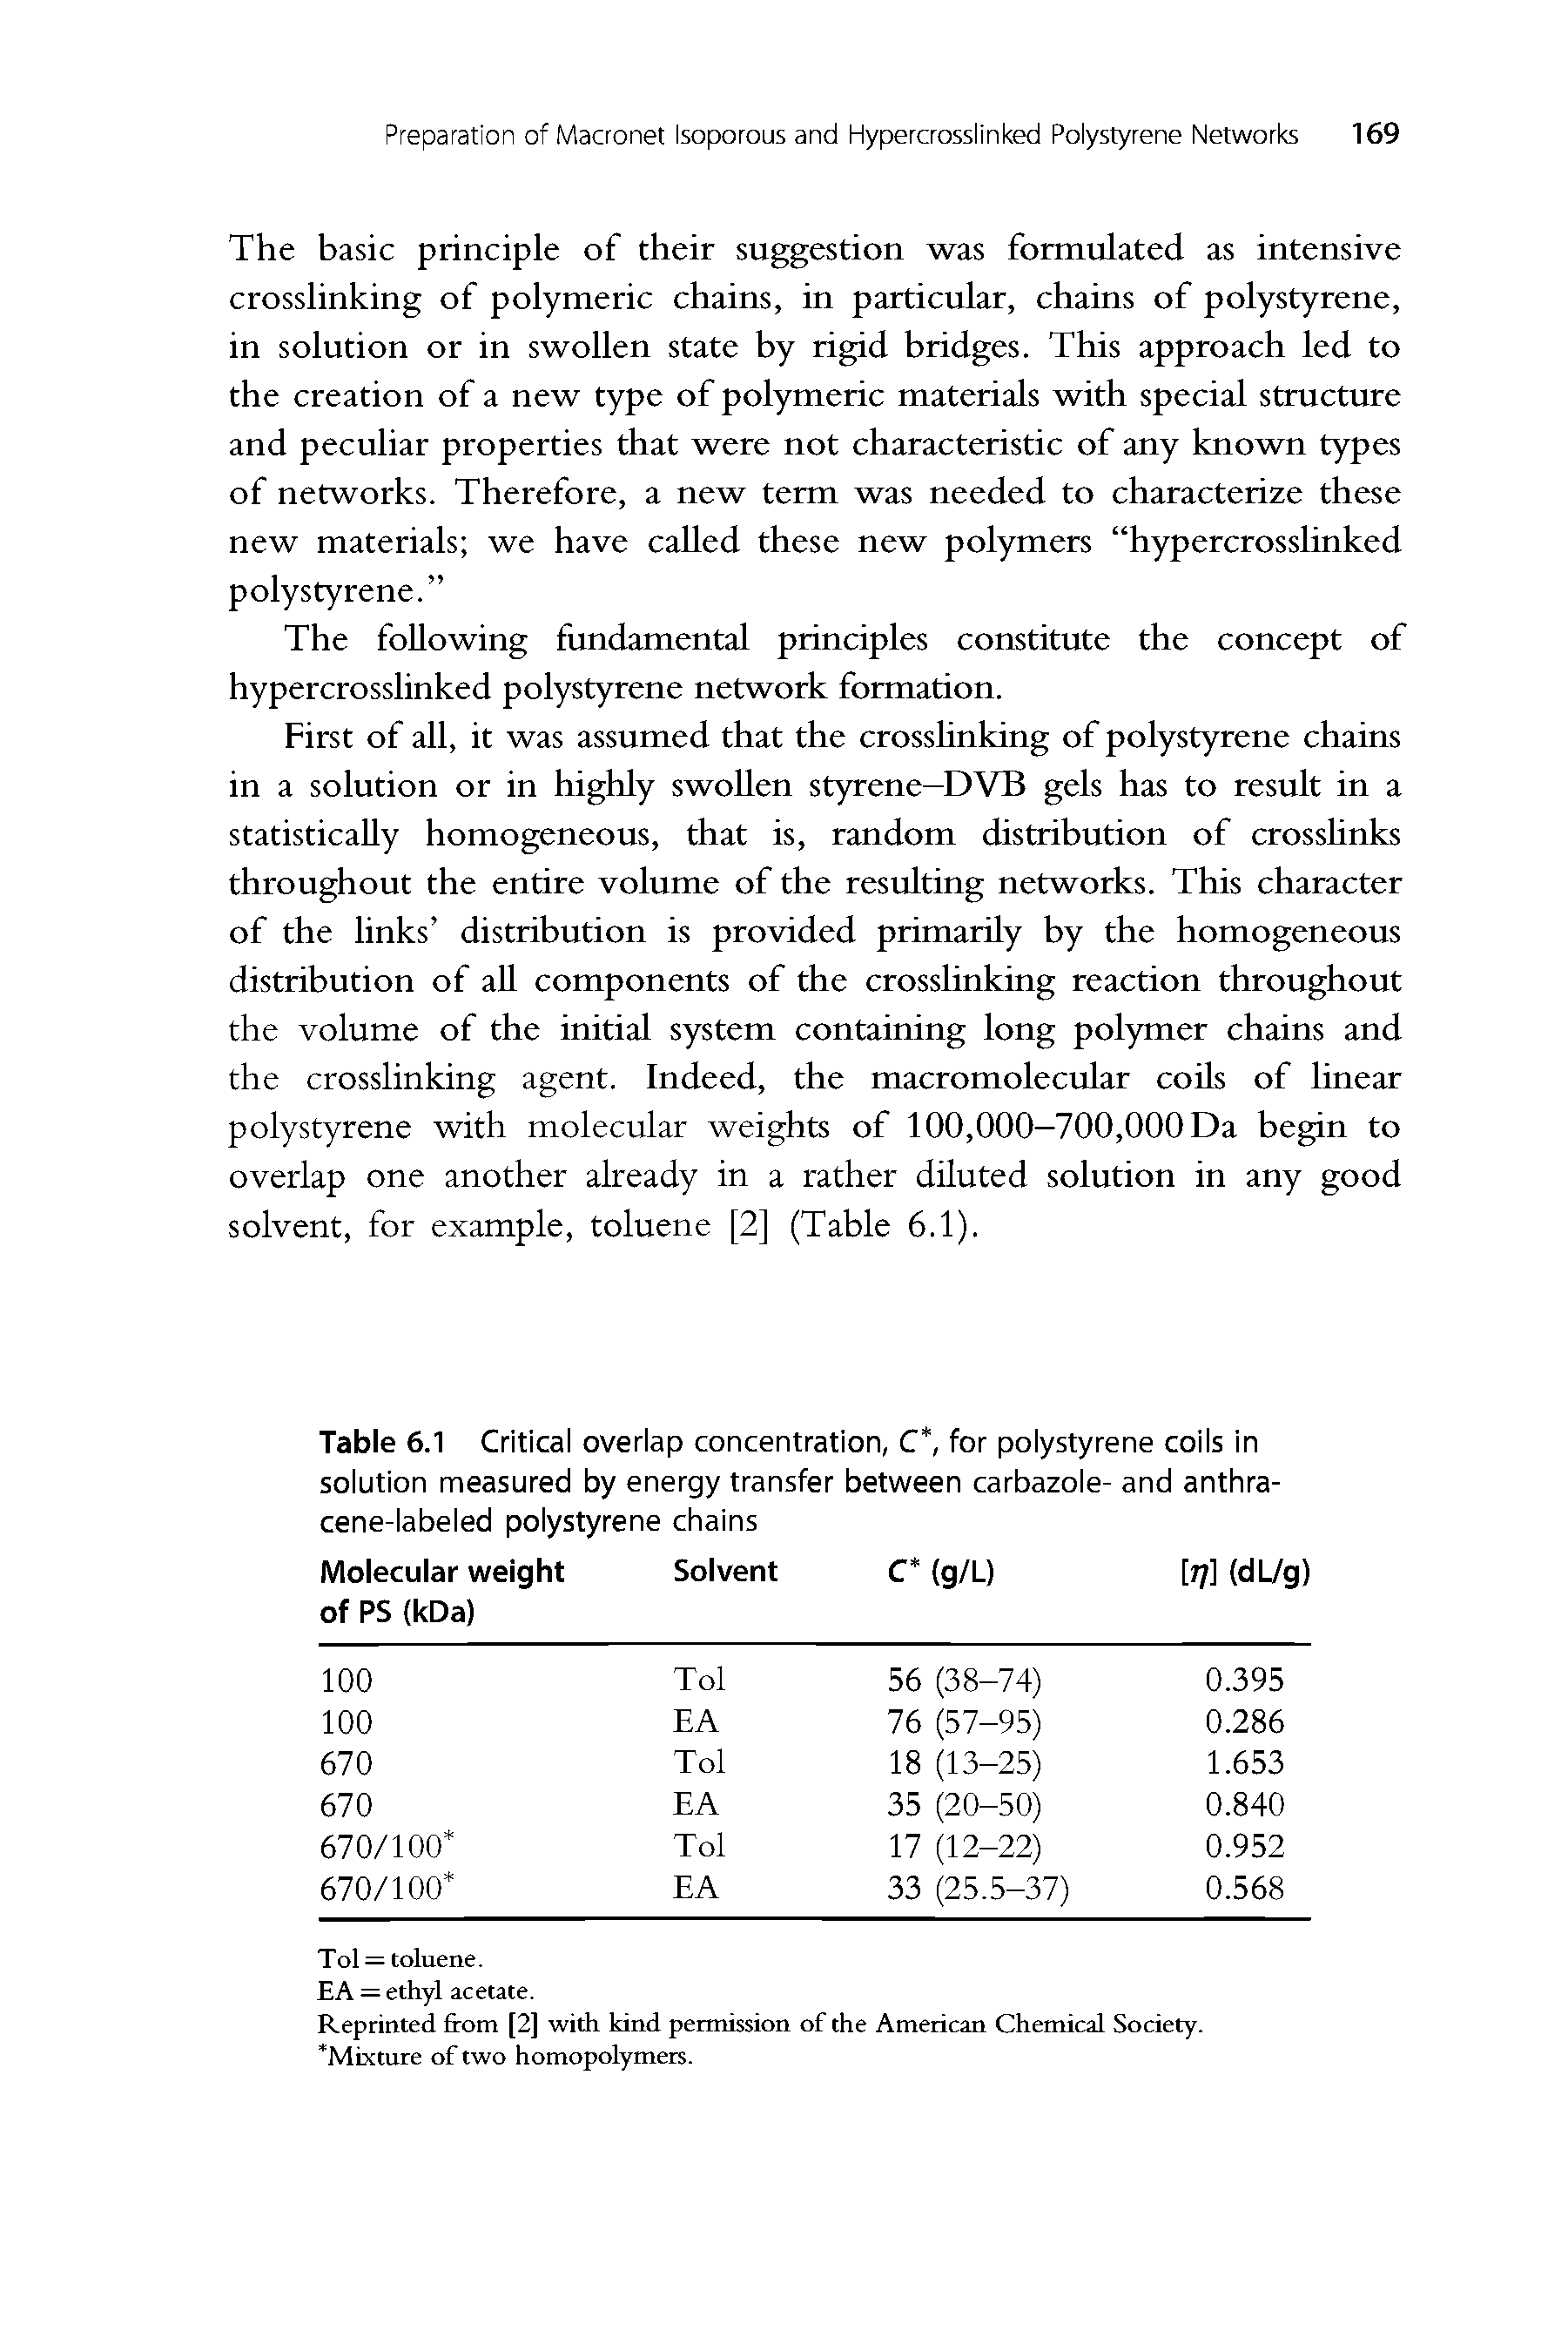 Table 6.1 Critical overlap concentration, C, for polystyrene coils in solution measured by energy transfer between carbazole- and anthracene-labeled polystyrene chains...